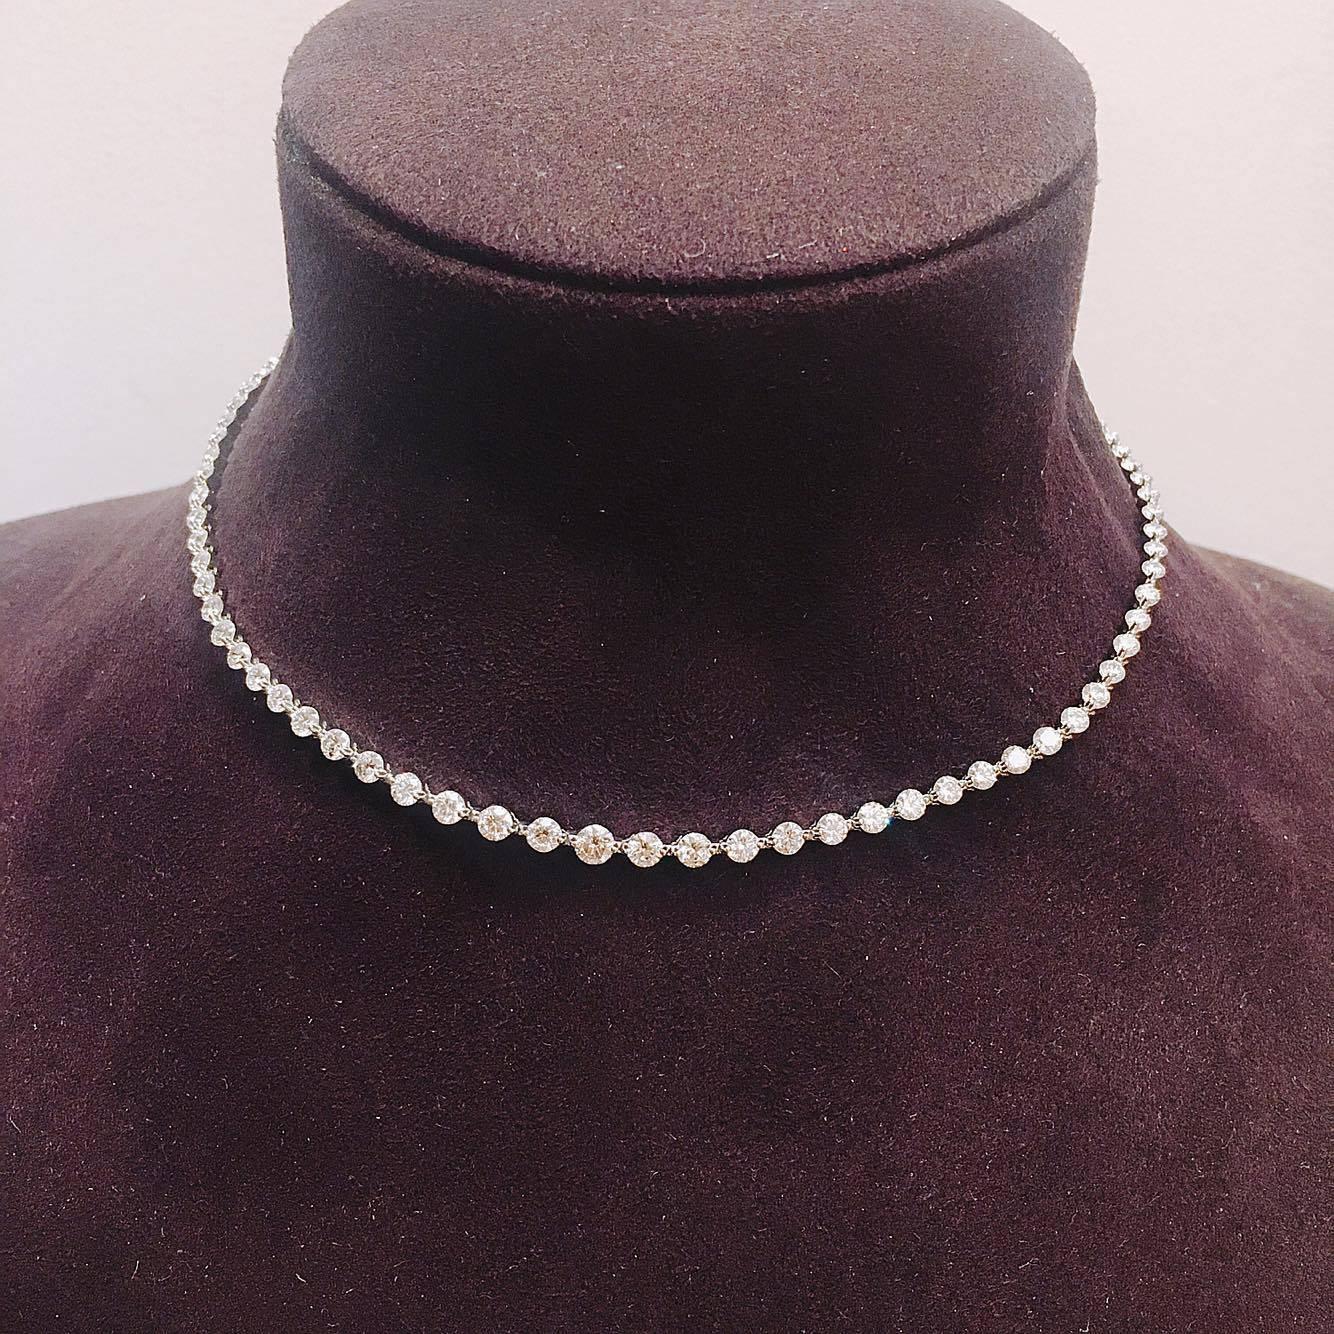 Approx. 11 carats total weight diamonds.The finest conflict free diamonds set in our unique diamond necklace. (Standard length is 17inch- 18inch, however we can alter this necklace to any size). Can be ordered in 14k or 18k white/yellow/rose gold as